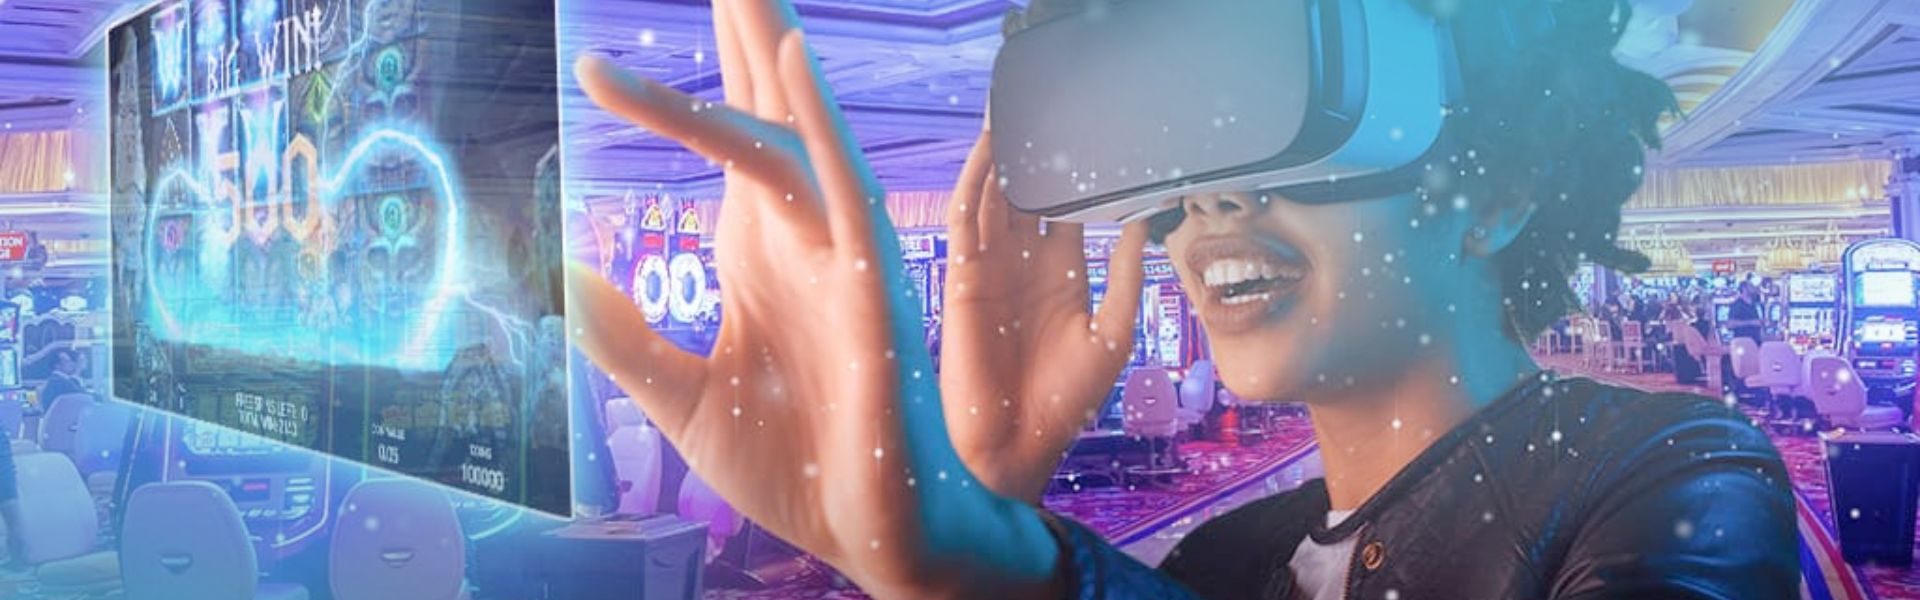 The Future is Already Here With Arcade Gamble Games in VR